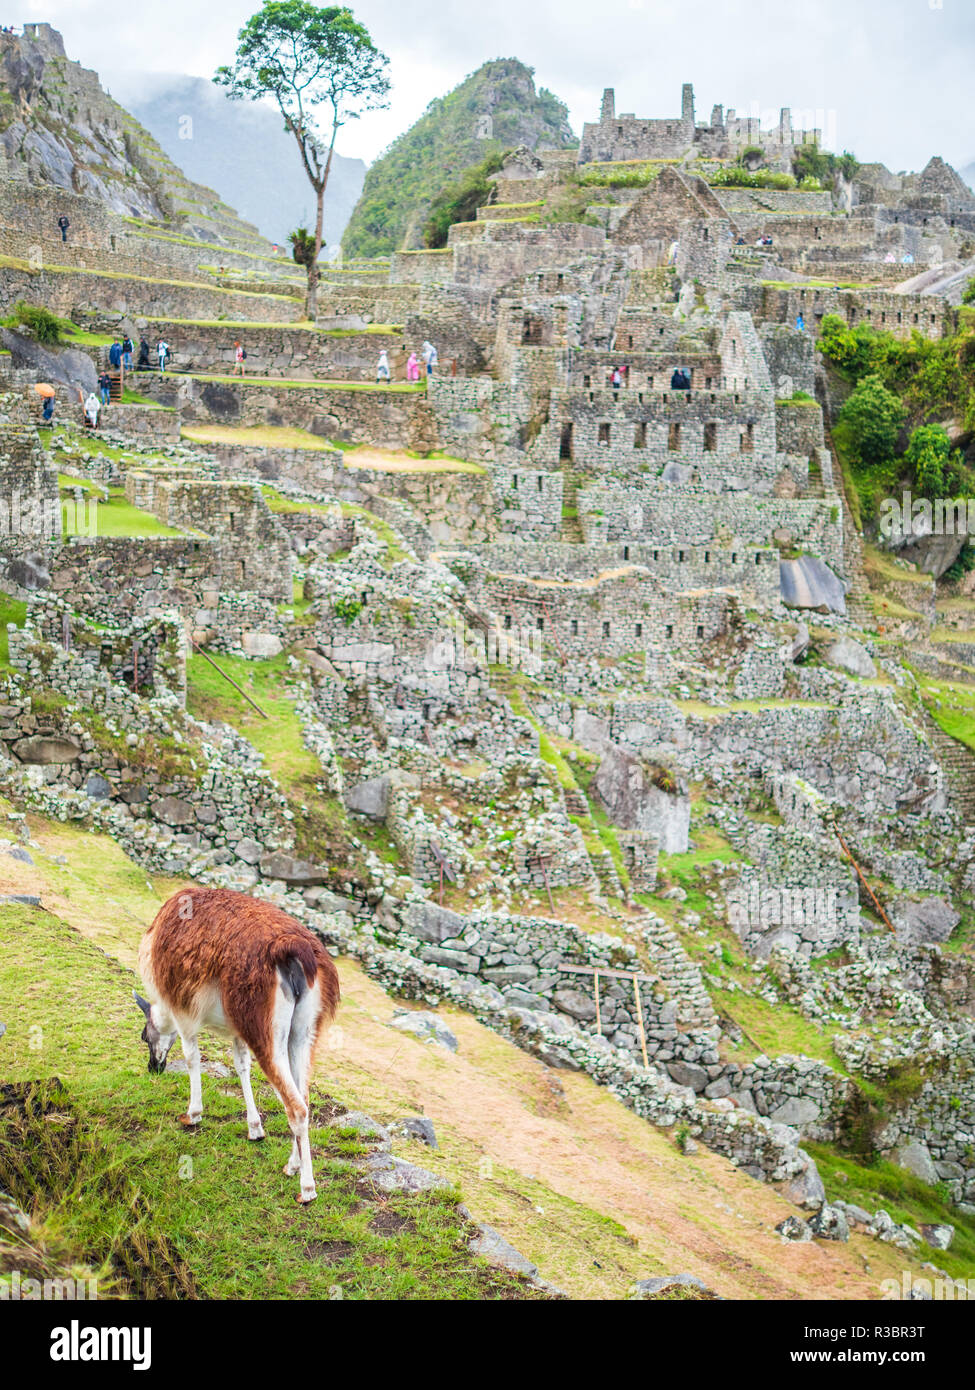 A llama eating grass in front of the Machu Picchu citadel Stock Photo